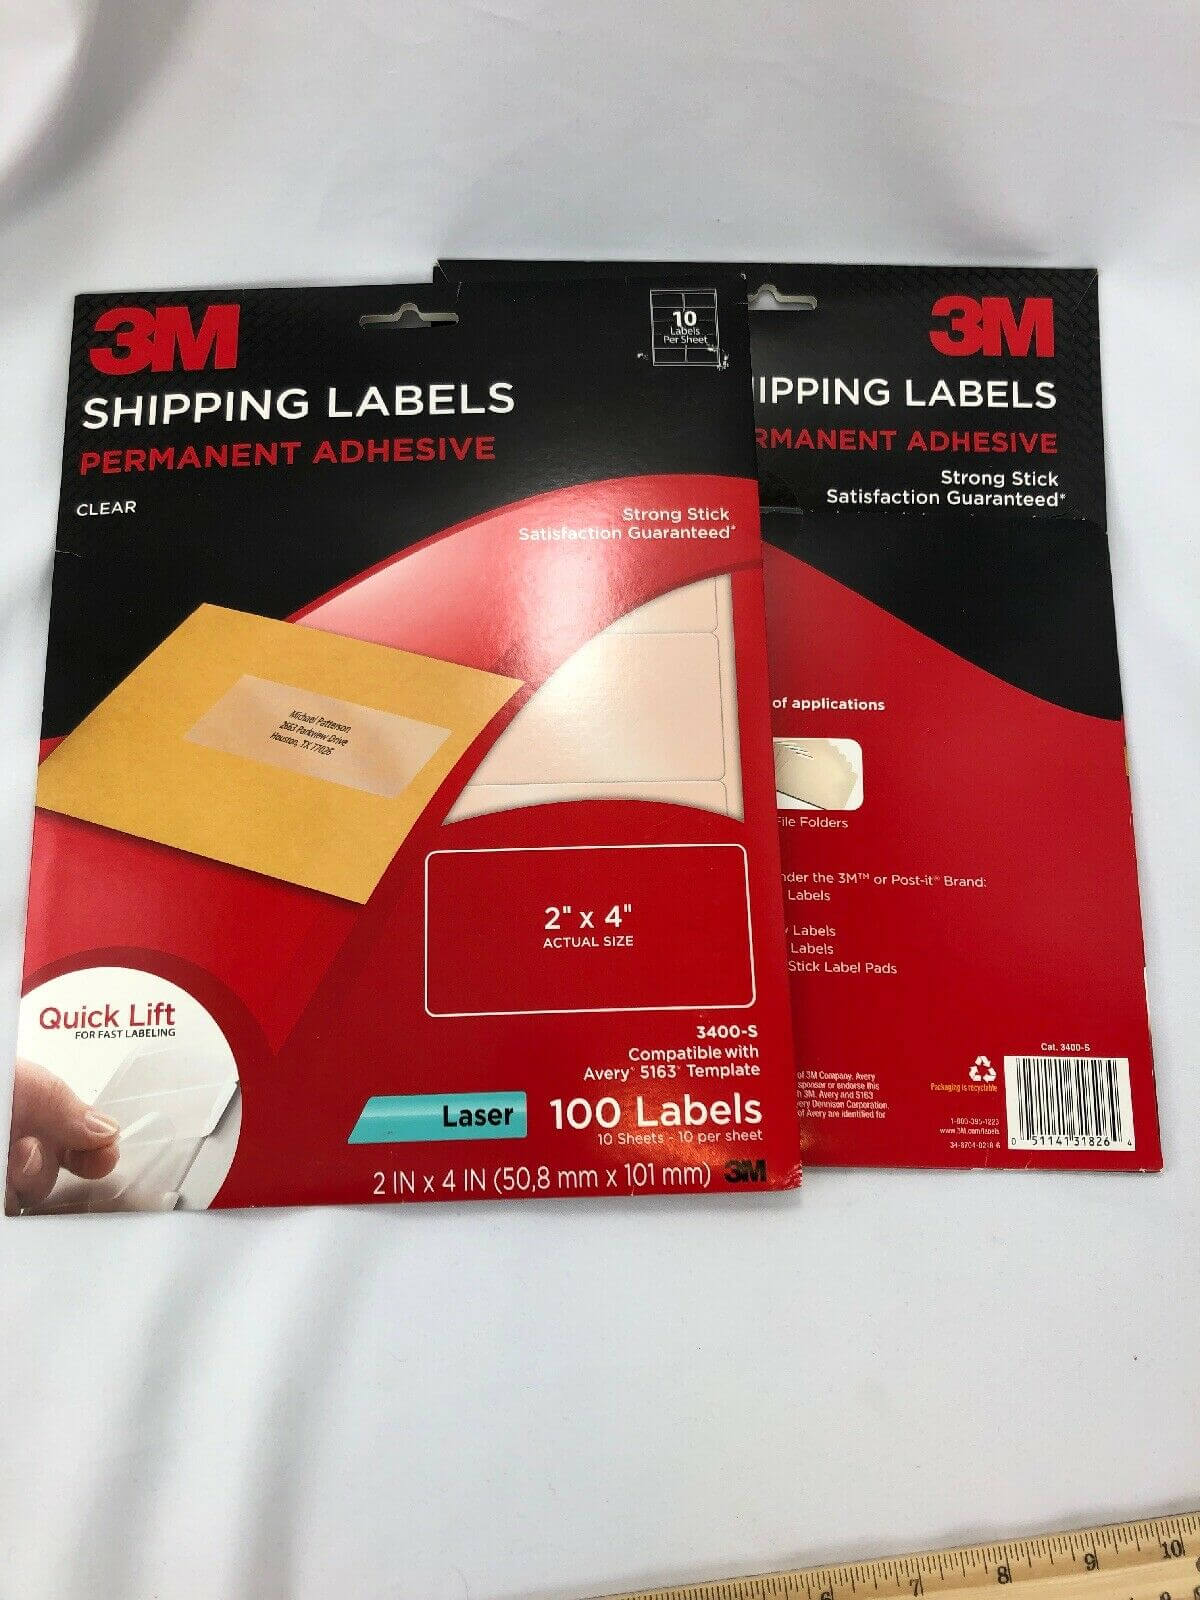 3M Shipping Labels Quick Lift Design Laser Printers Clear 2 X 4" 200 2 Packs Pertaining To 3M Label Template